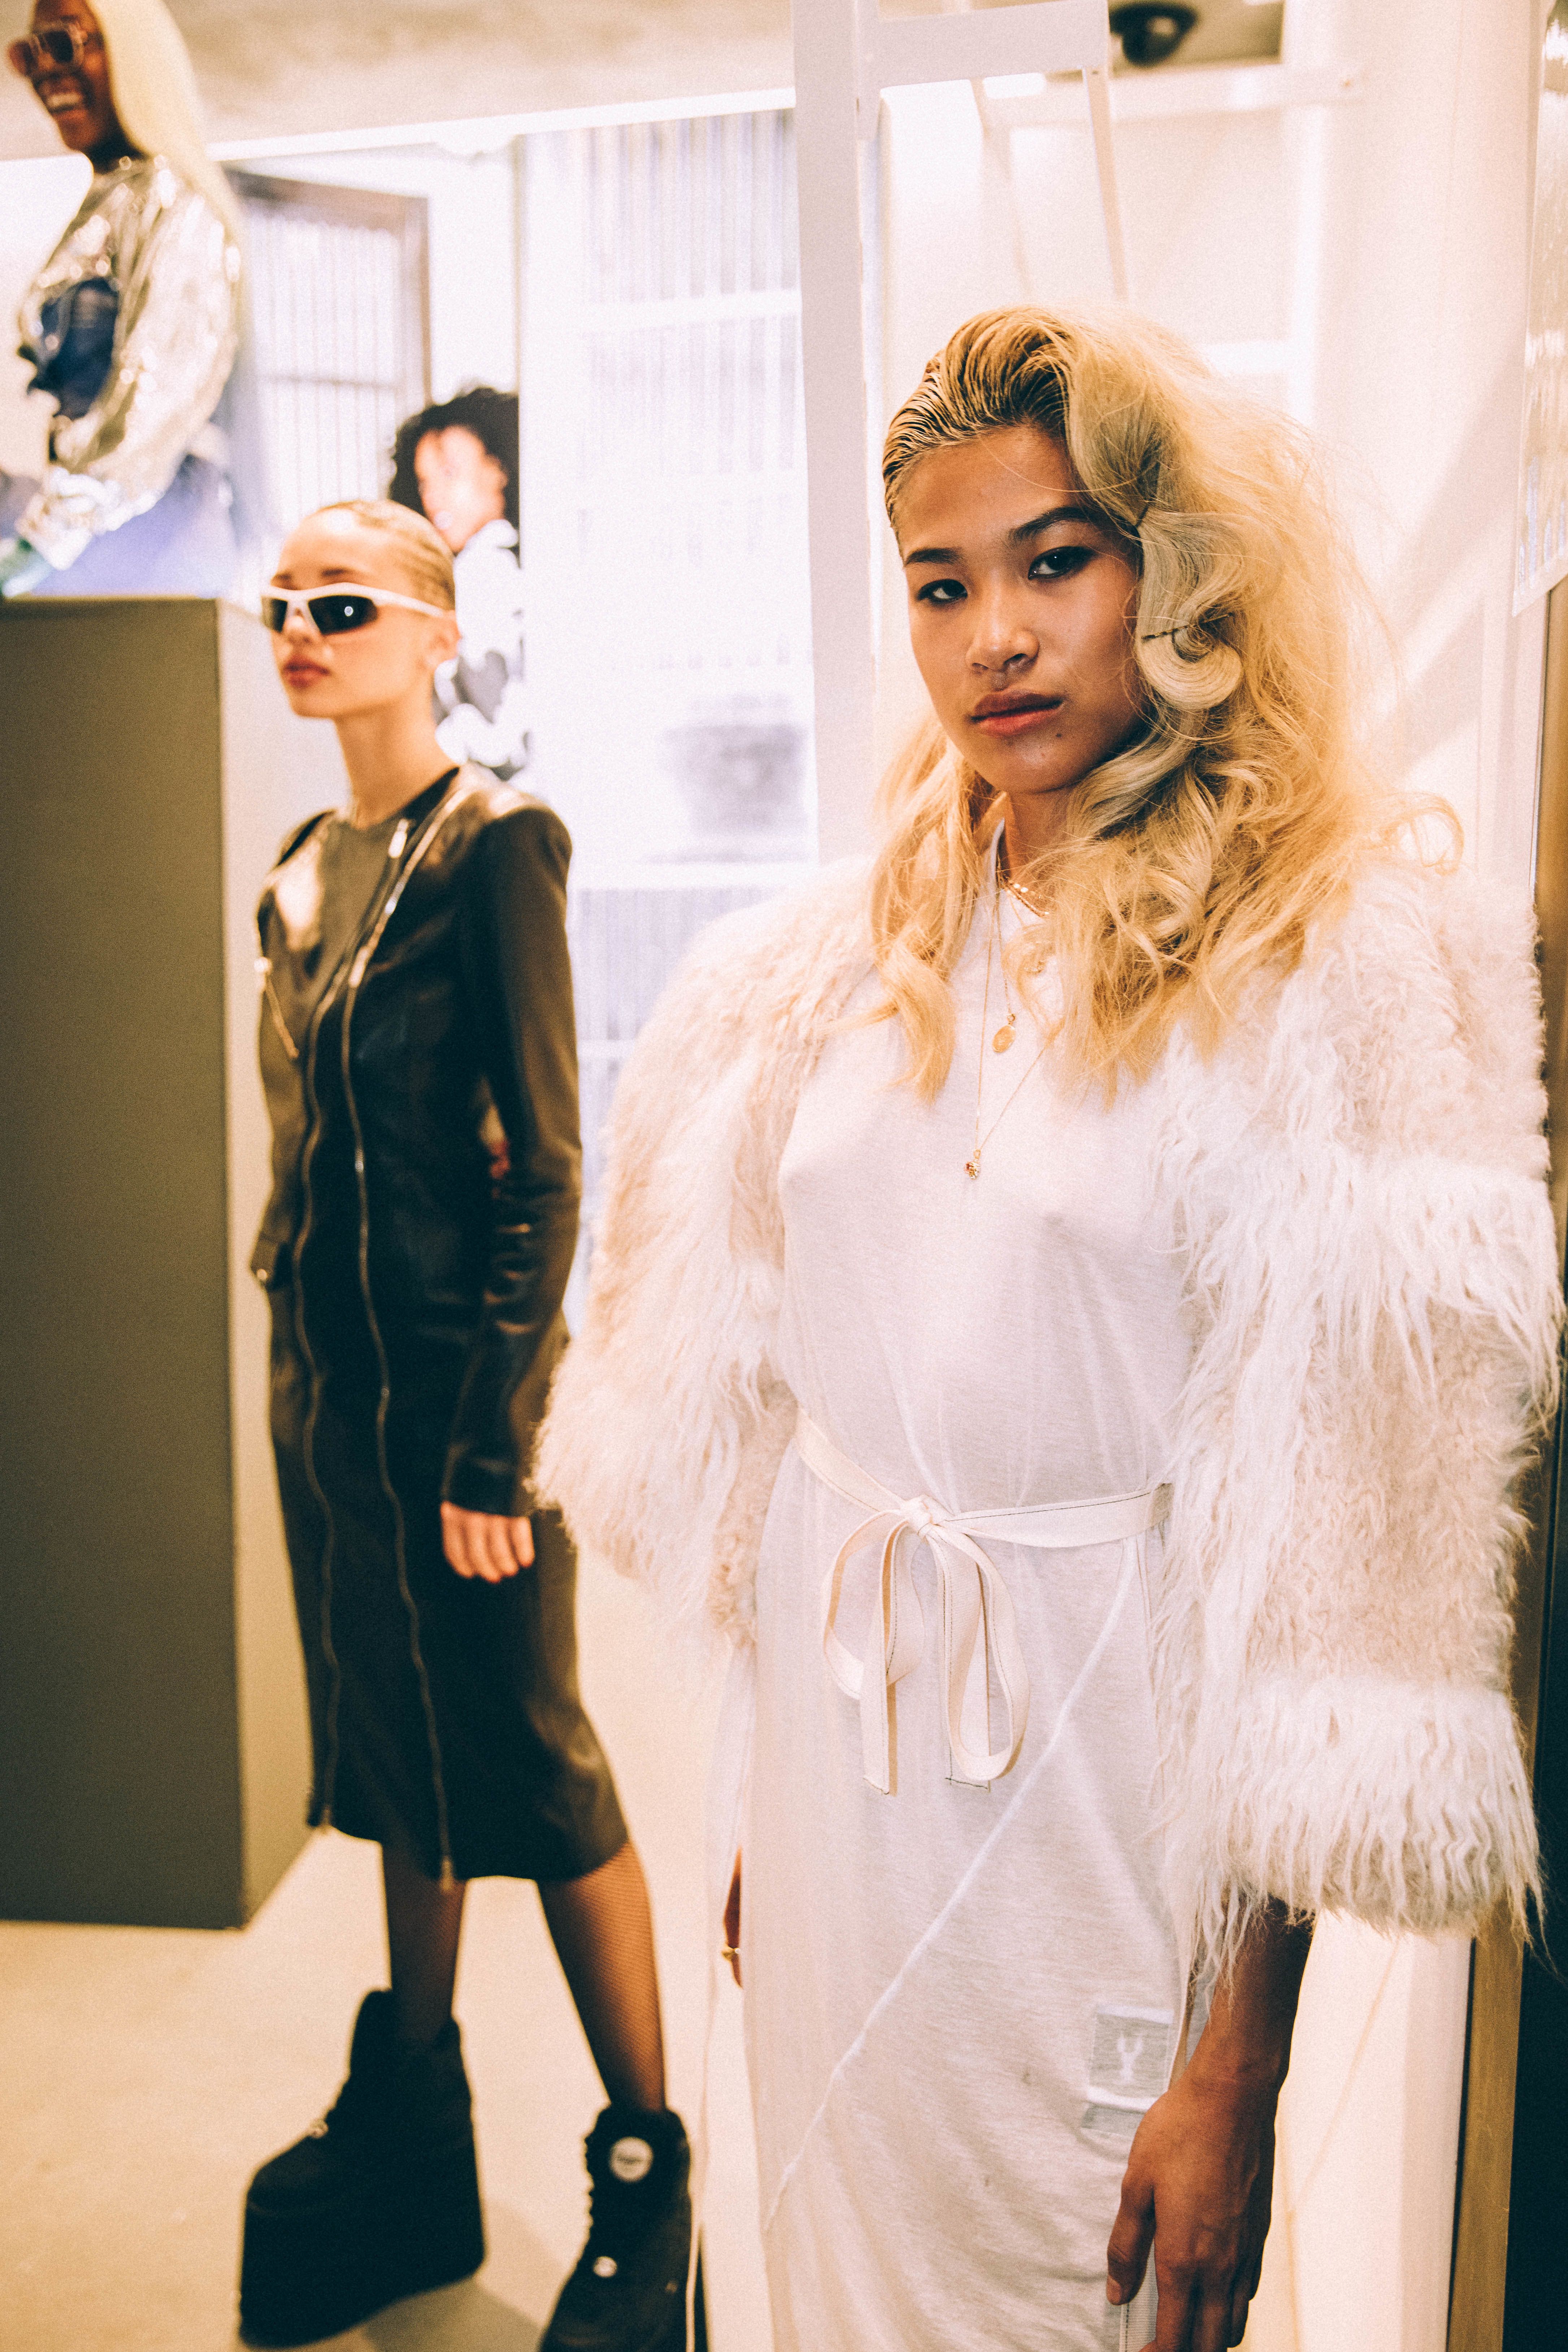 London's NYFW Debut: For the Club Kid You